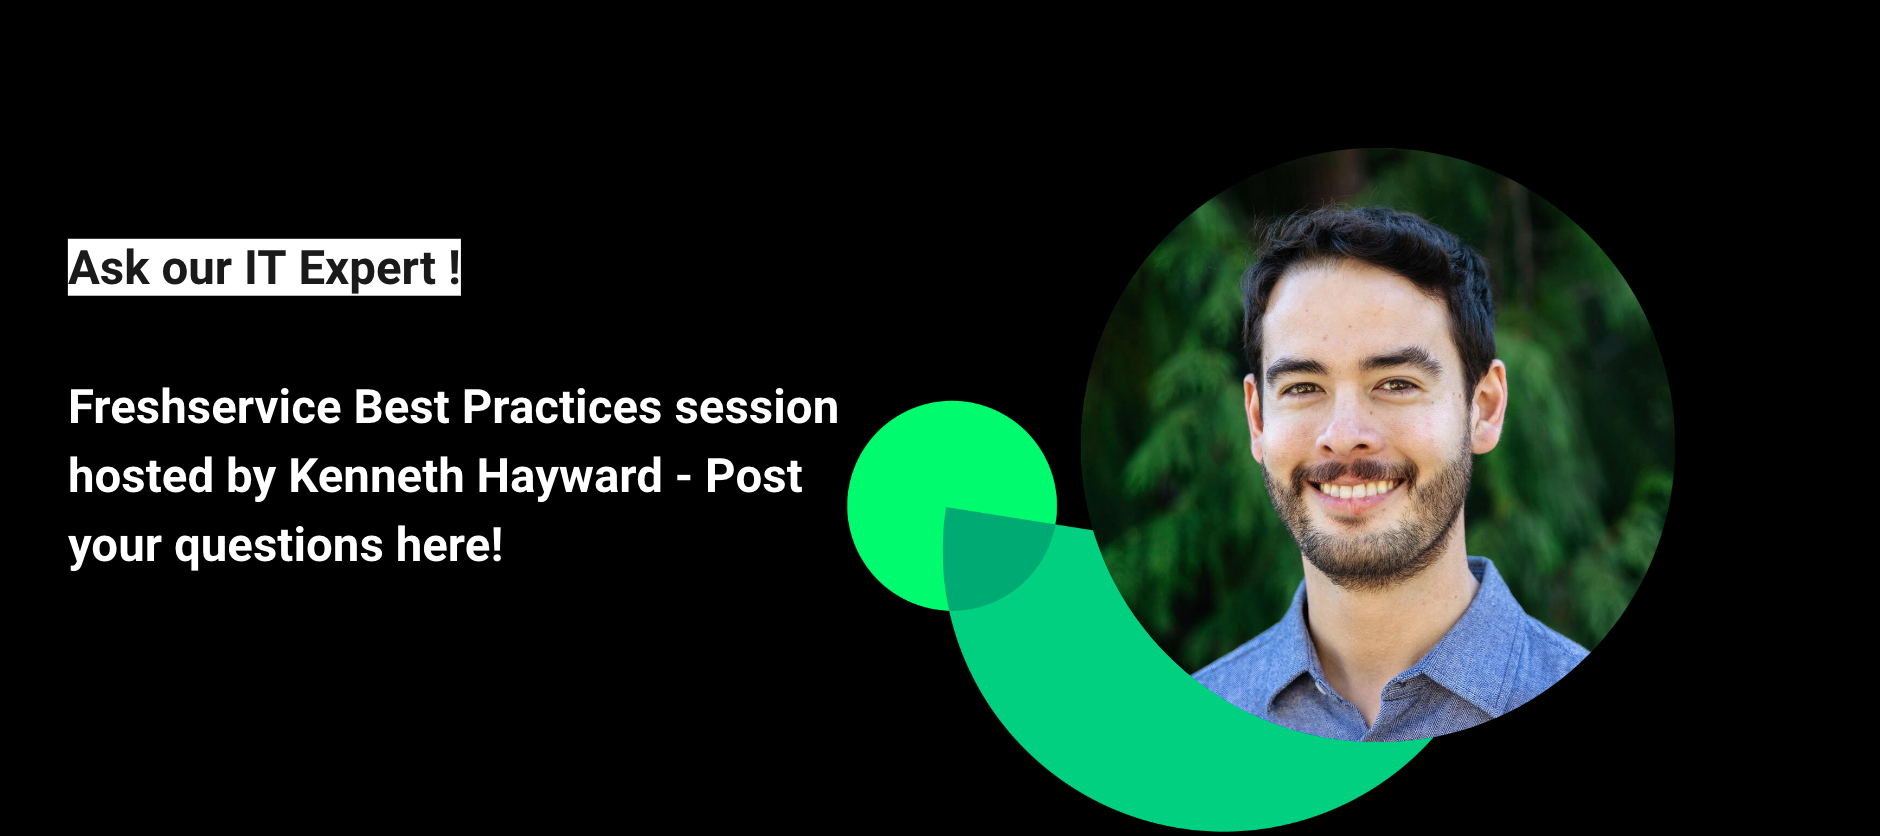 Ask our IT Expert ! Freshservice Best Practices session hosted by Kenneth Hayward - Post your questions here!